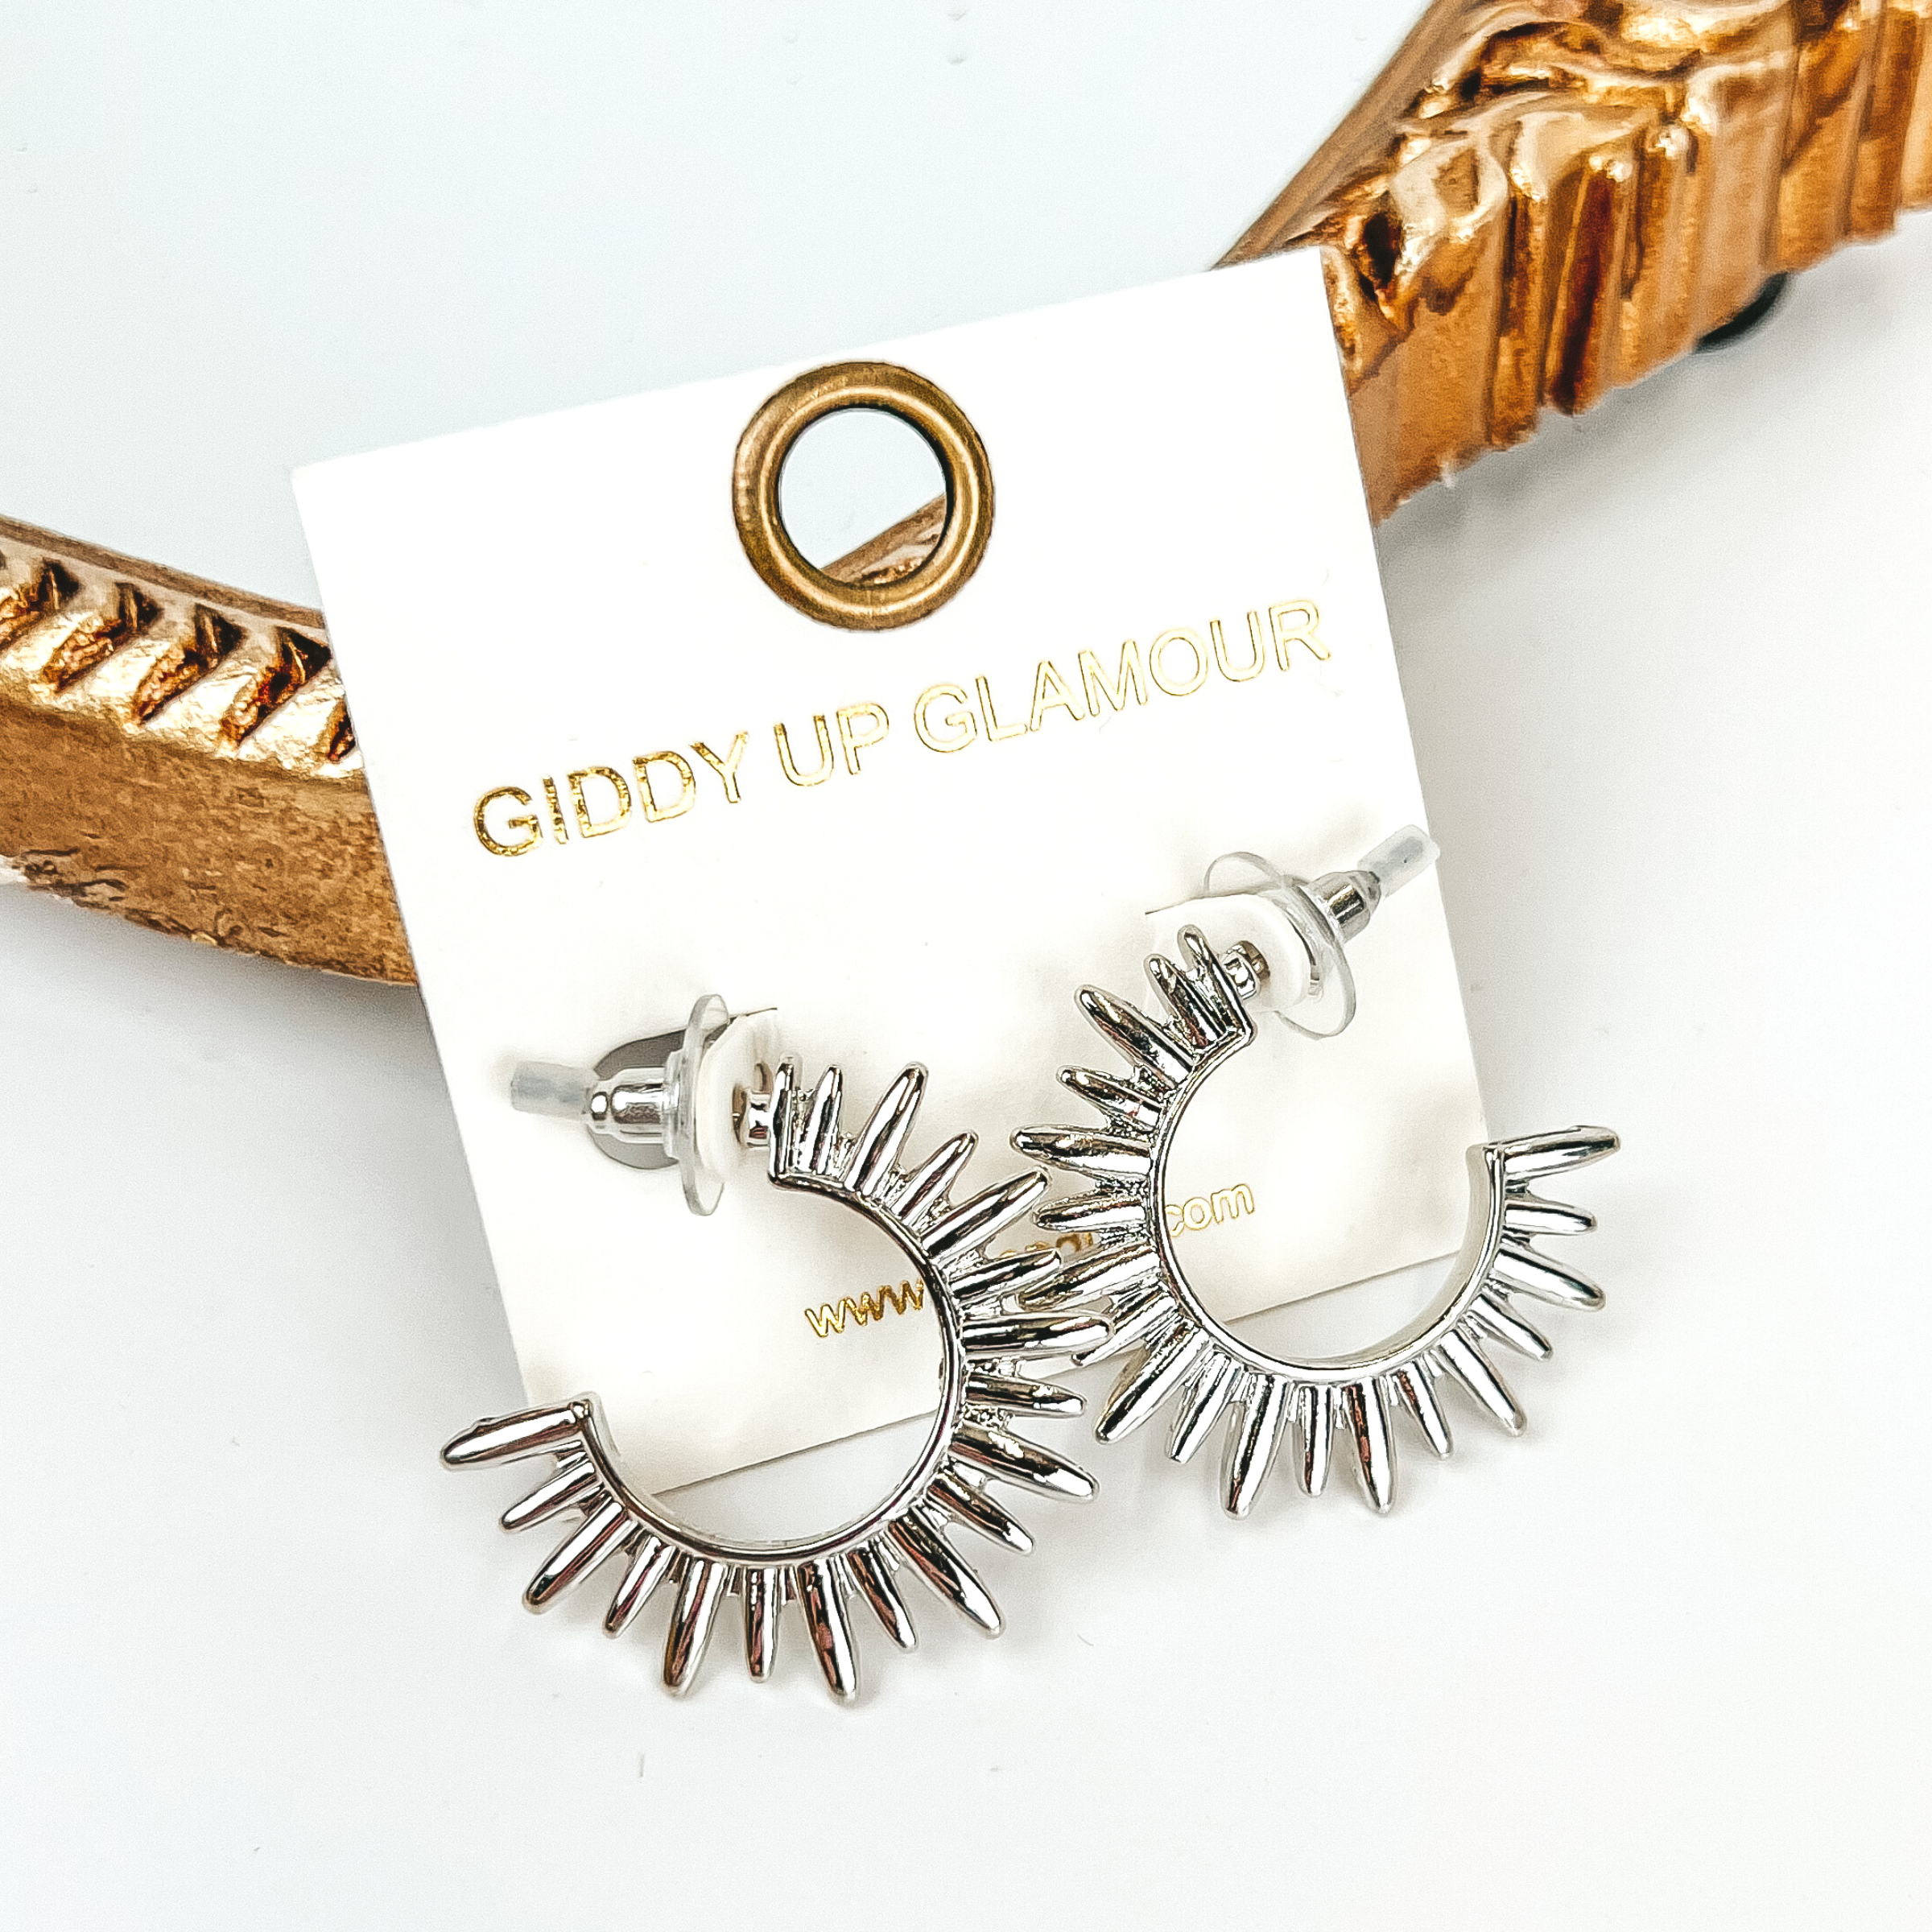 Silver sunburst hoop earrings. These earrings are pictured on a white background with a gold mirror behind the earrings. 